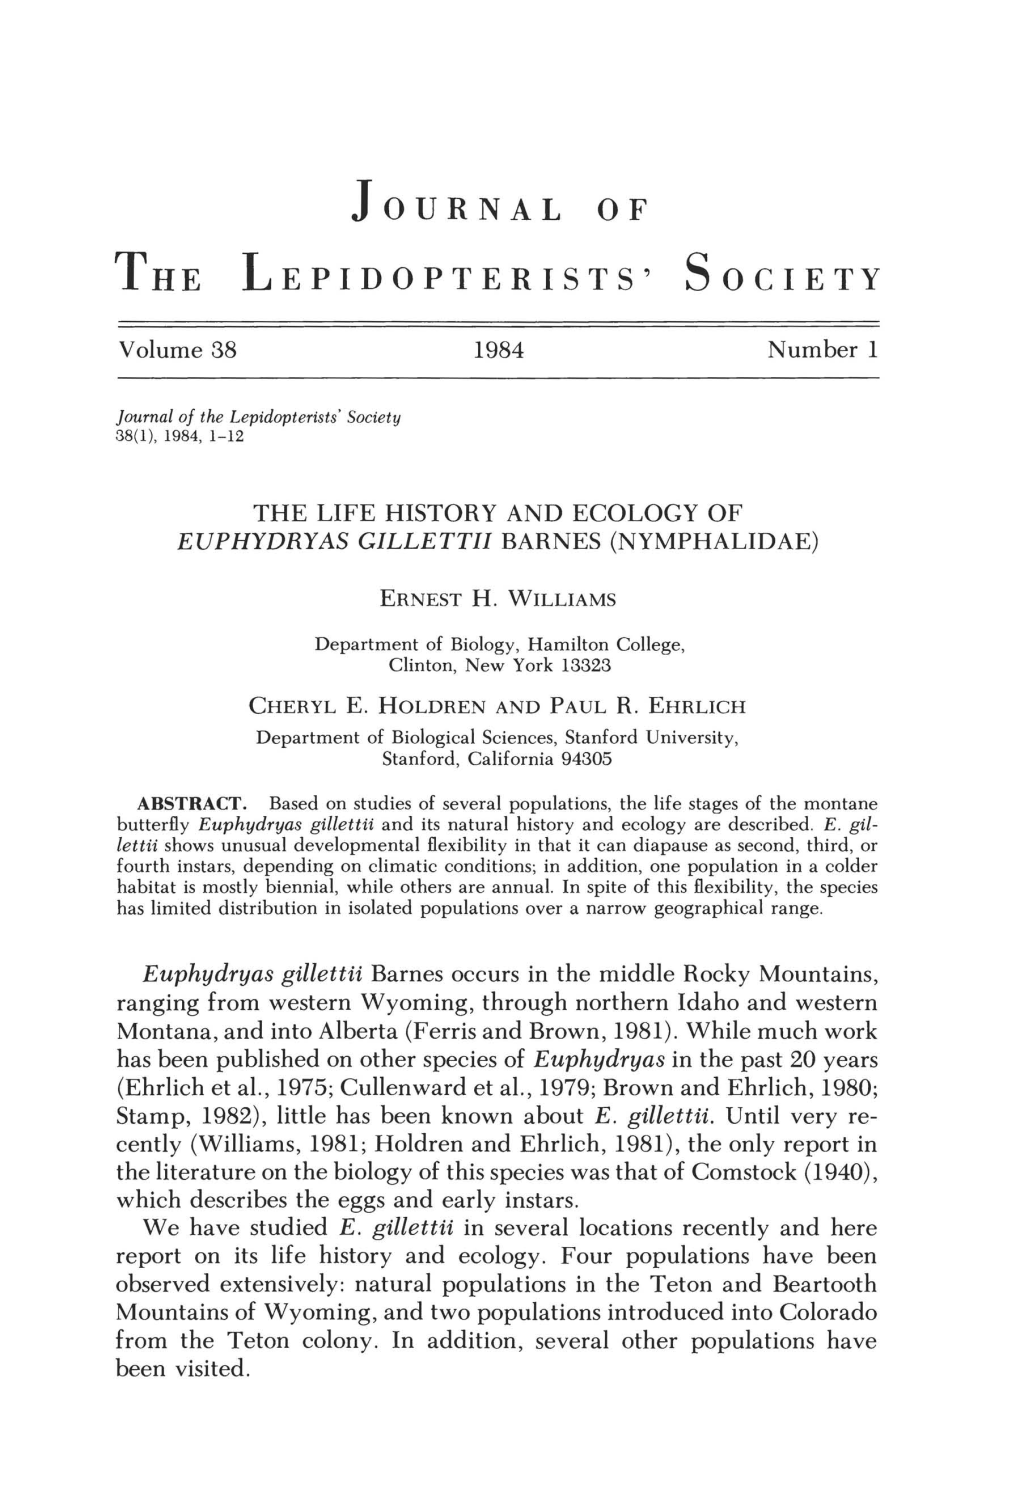 The Life History and Ecology of Euphydryas Gillettii Barnes (Nymphalidae)